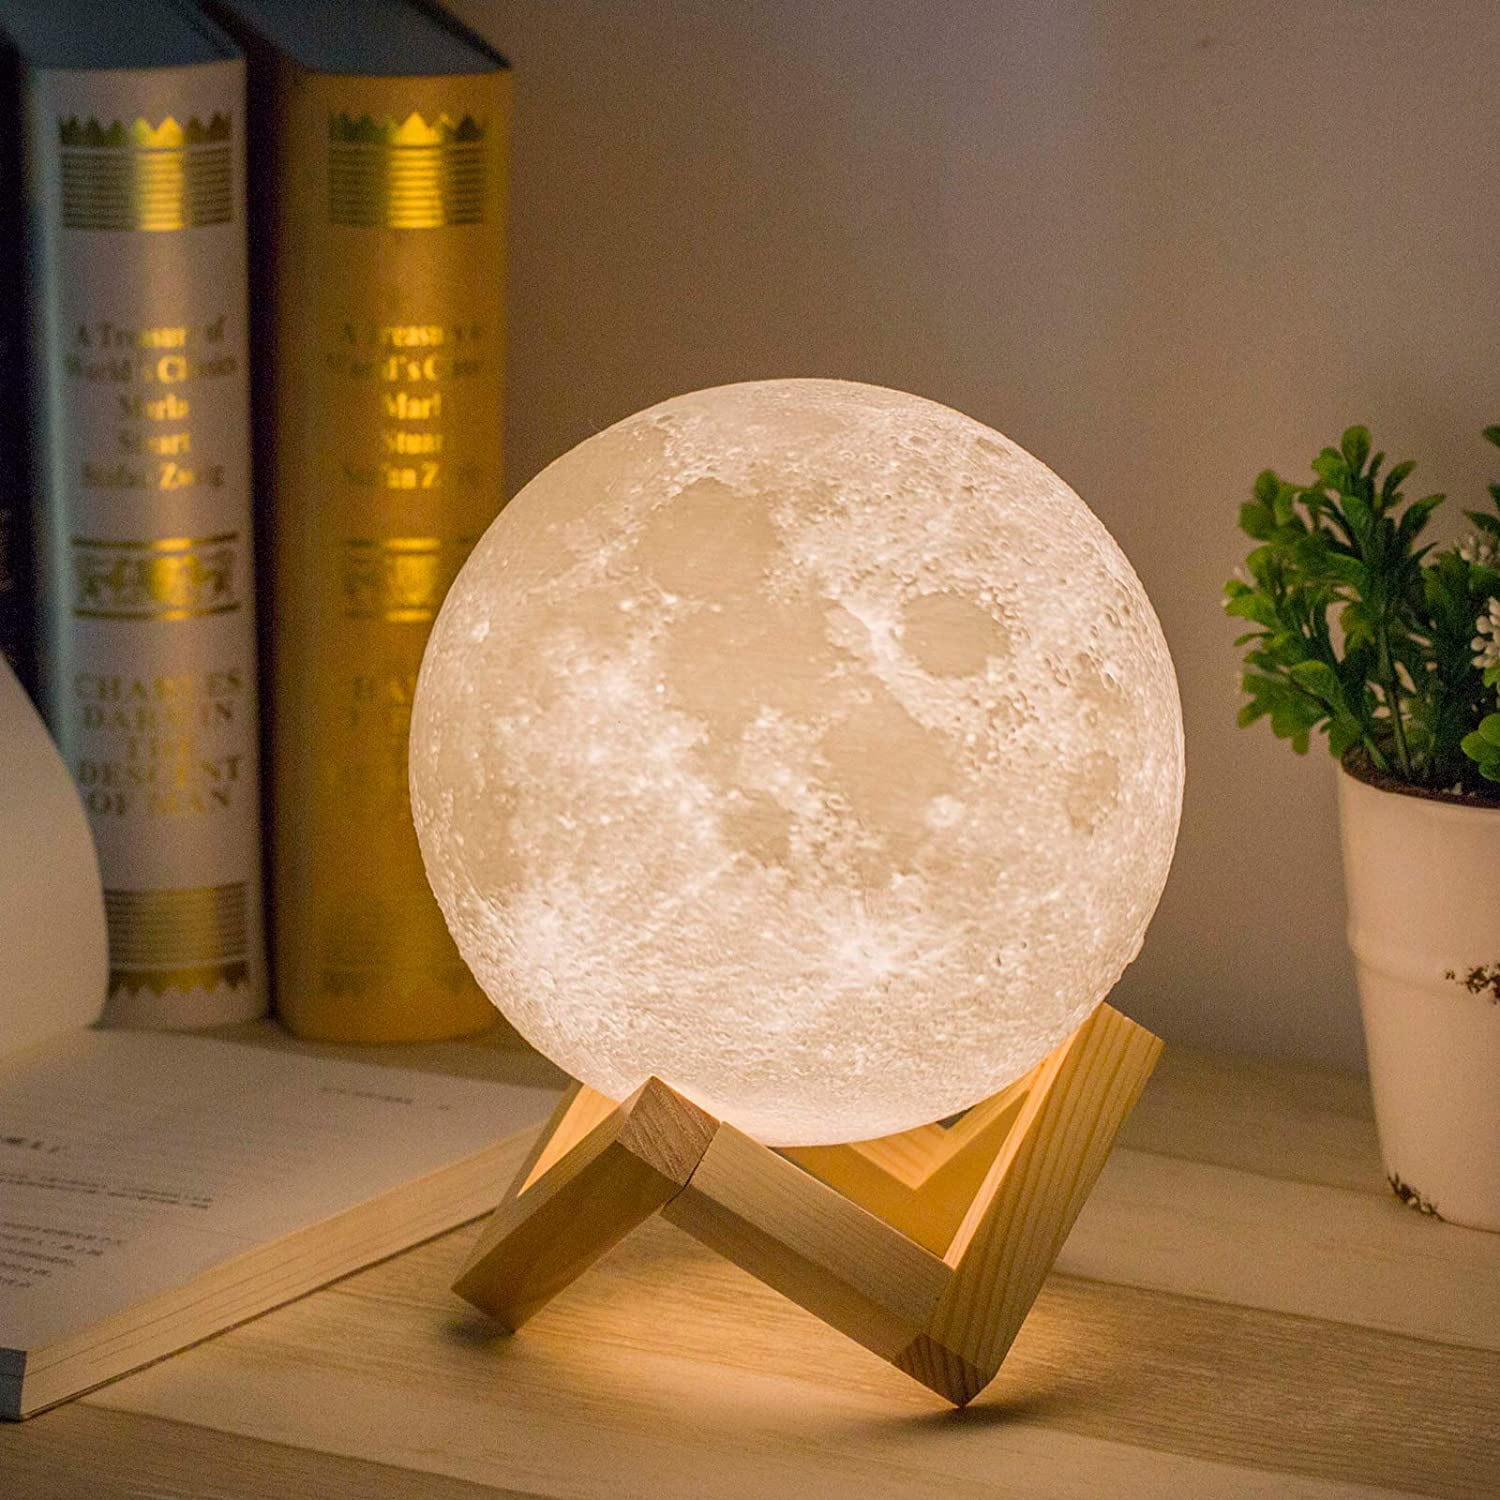 Dimmable 3D Magical Moon Lamp USB LED Night Light Moonlight Touch Sensor Gift 